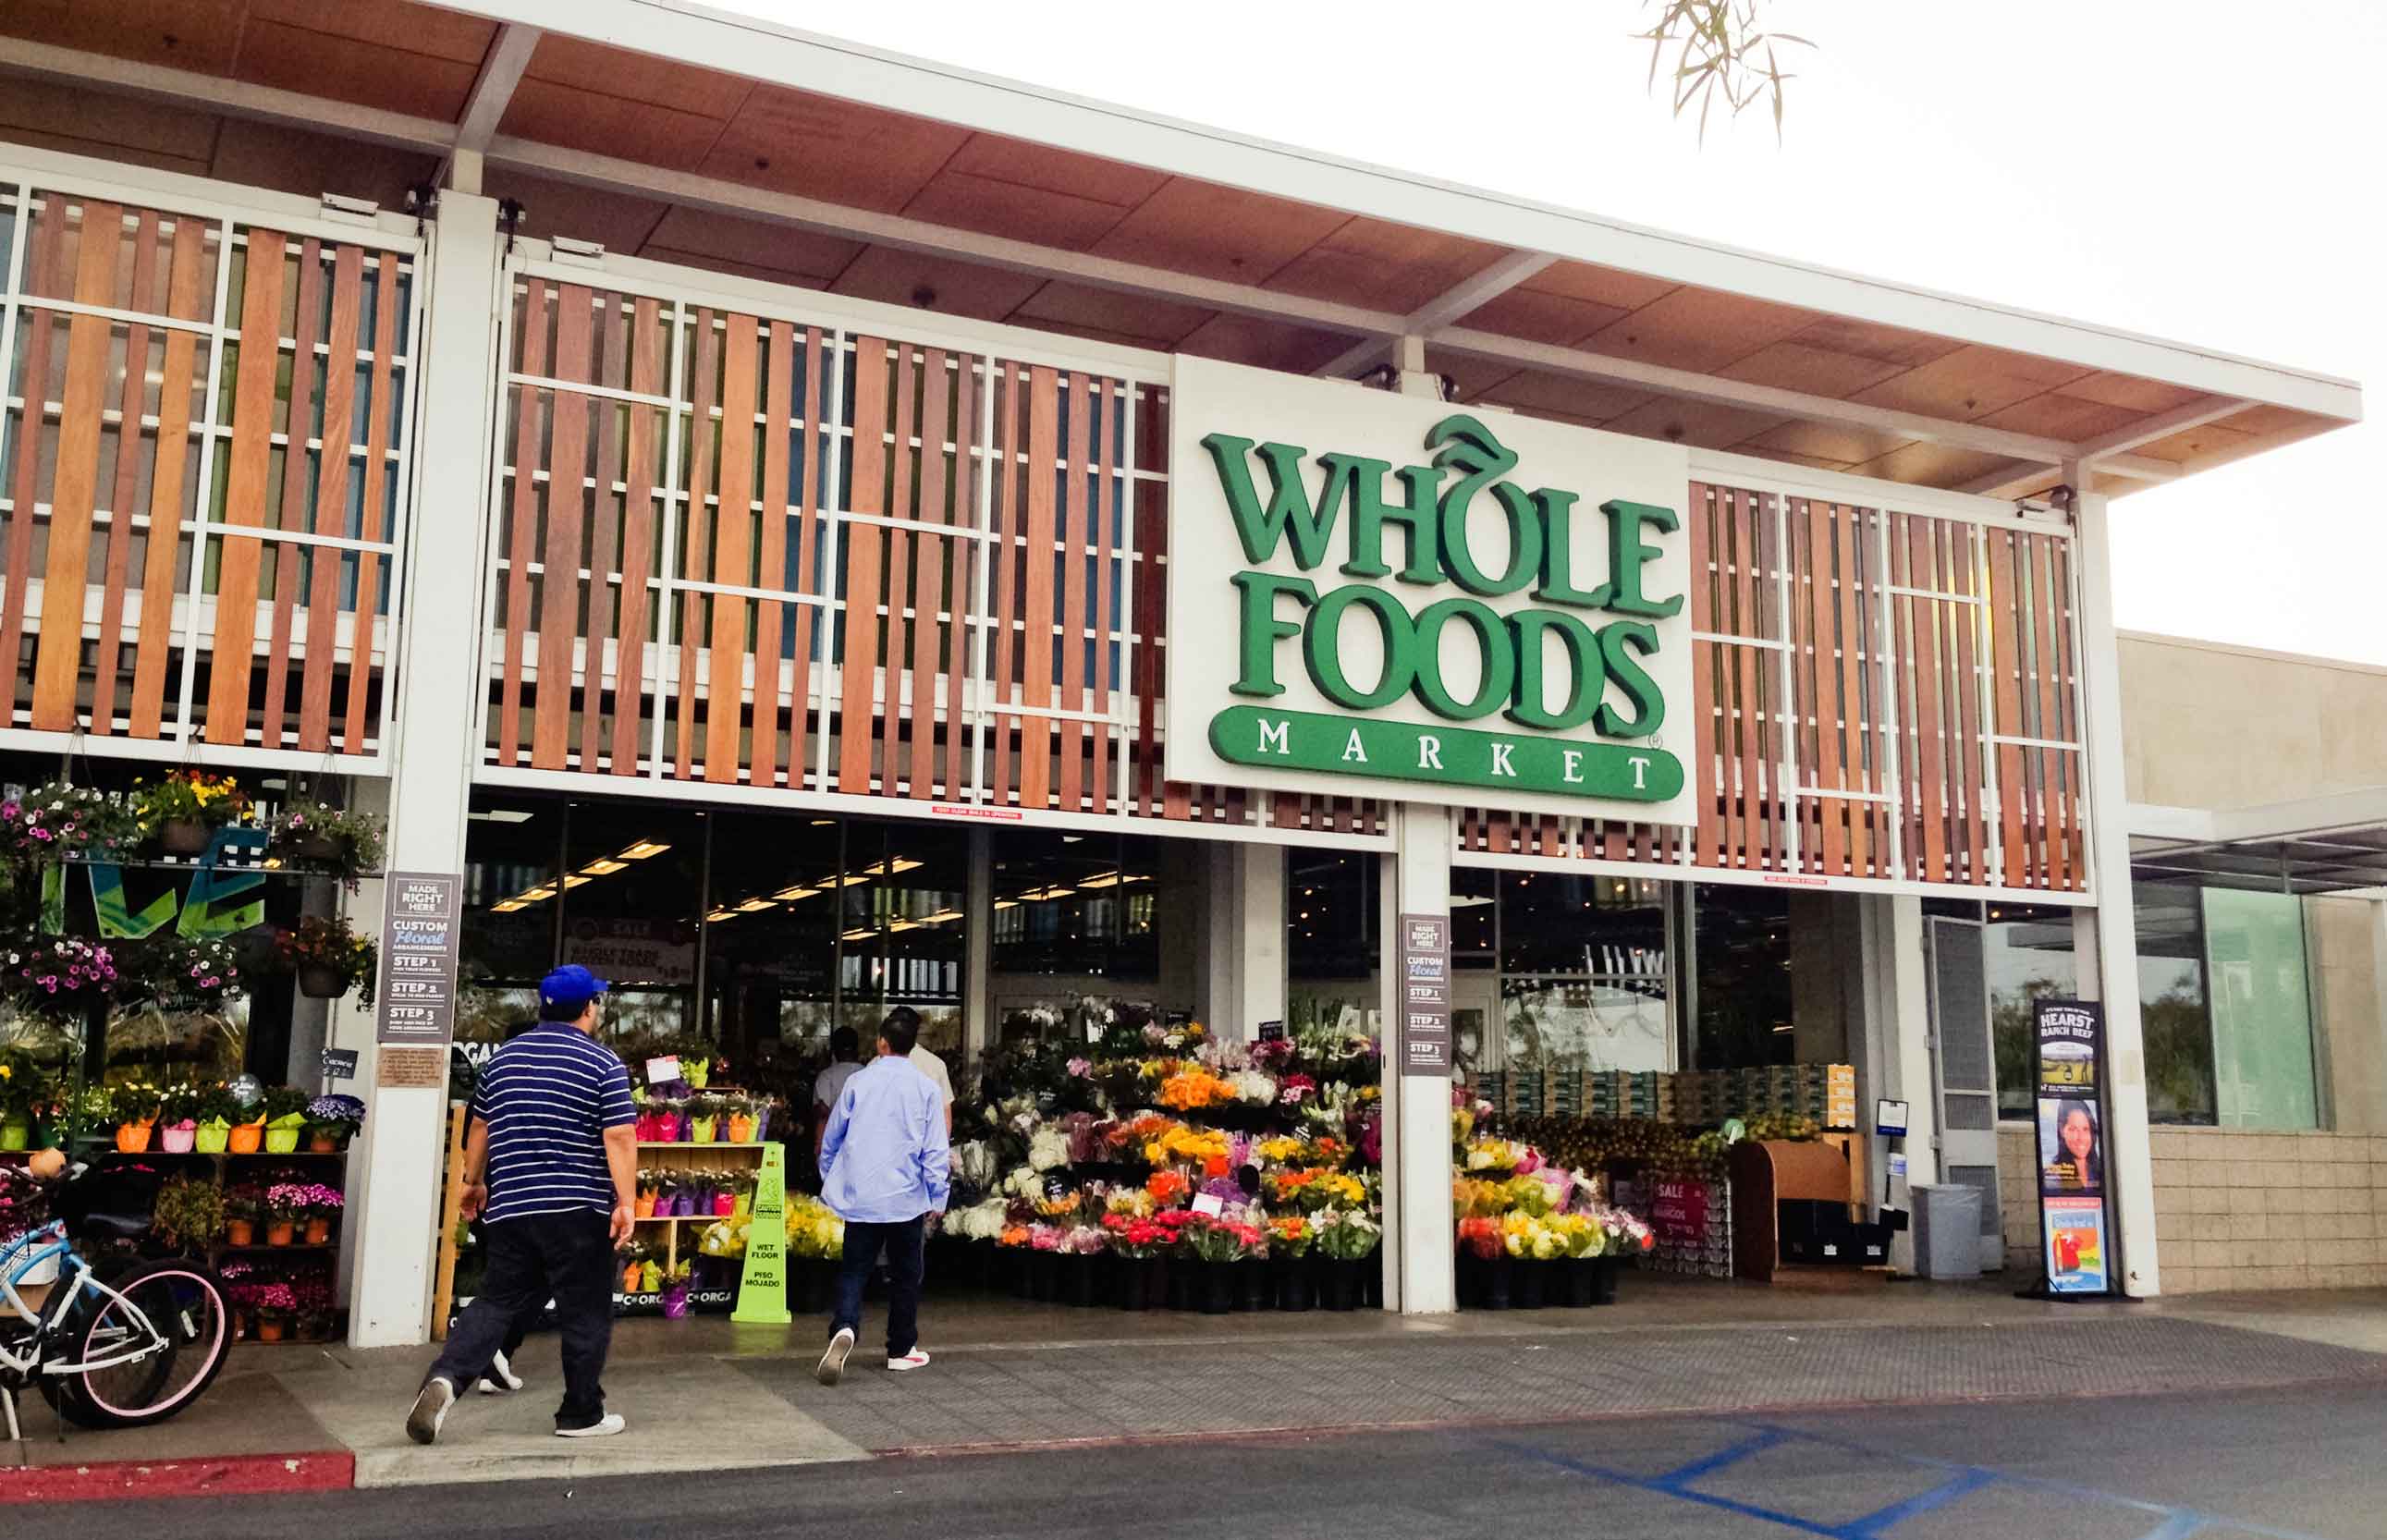 The days of 16-cent breakfasts may be ending — that is, if Whole Foods makes good on its promise to lower prices.